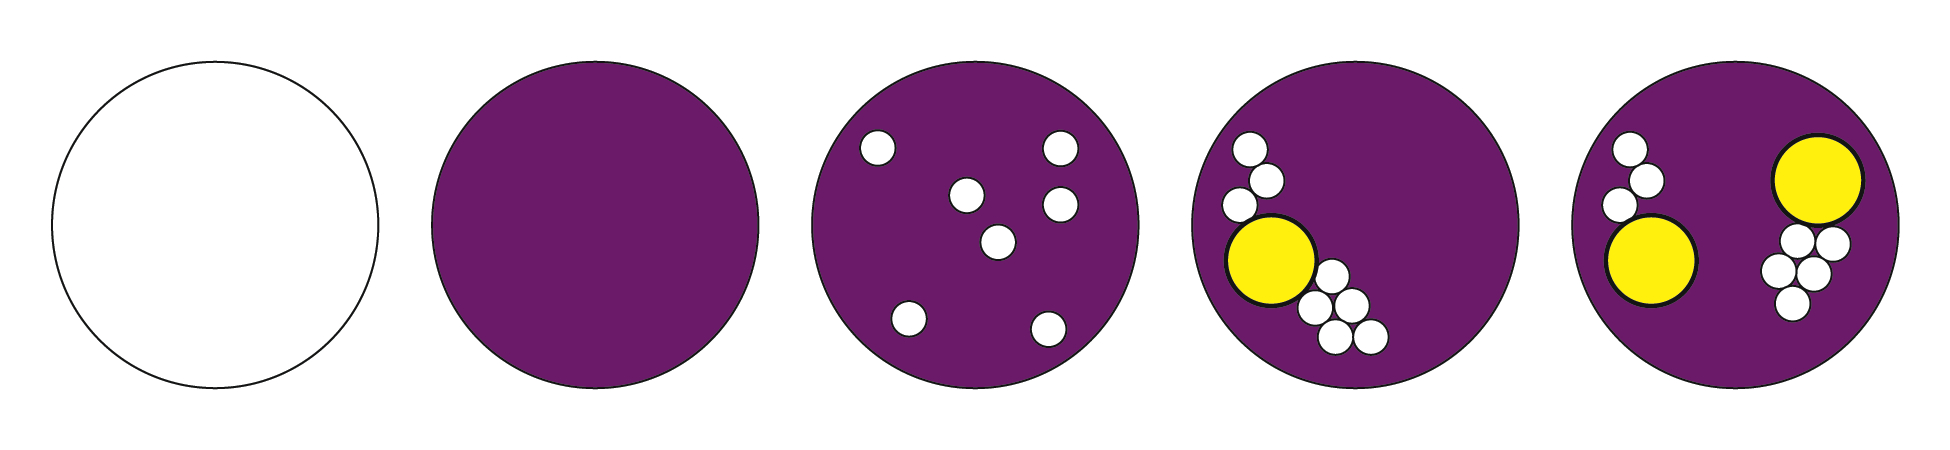 Five purple cells with varying arrangements of inner parts.